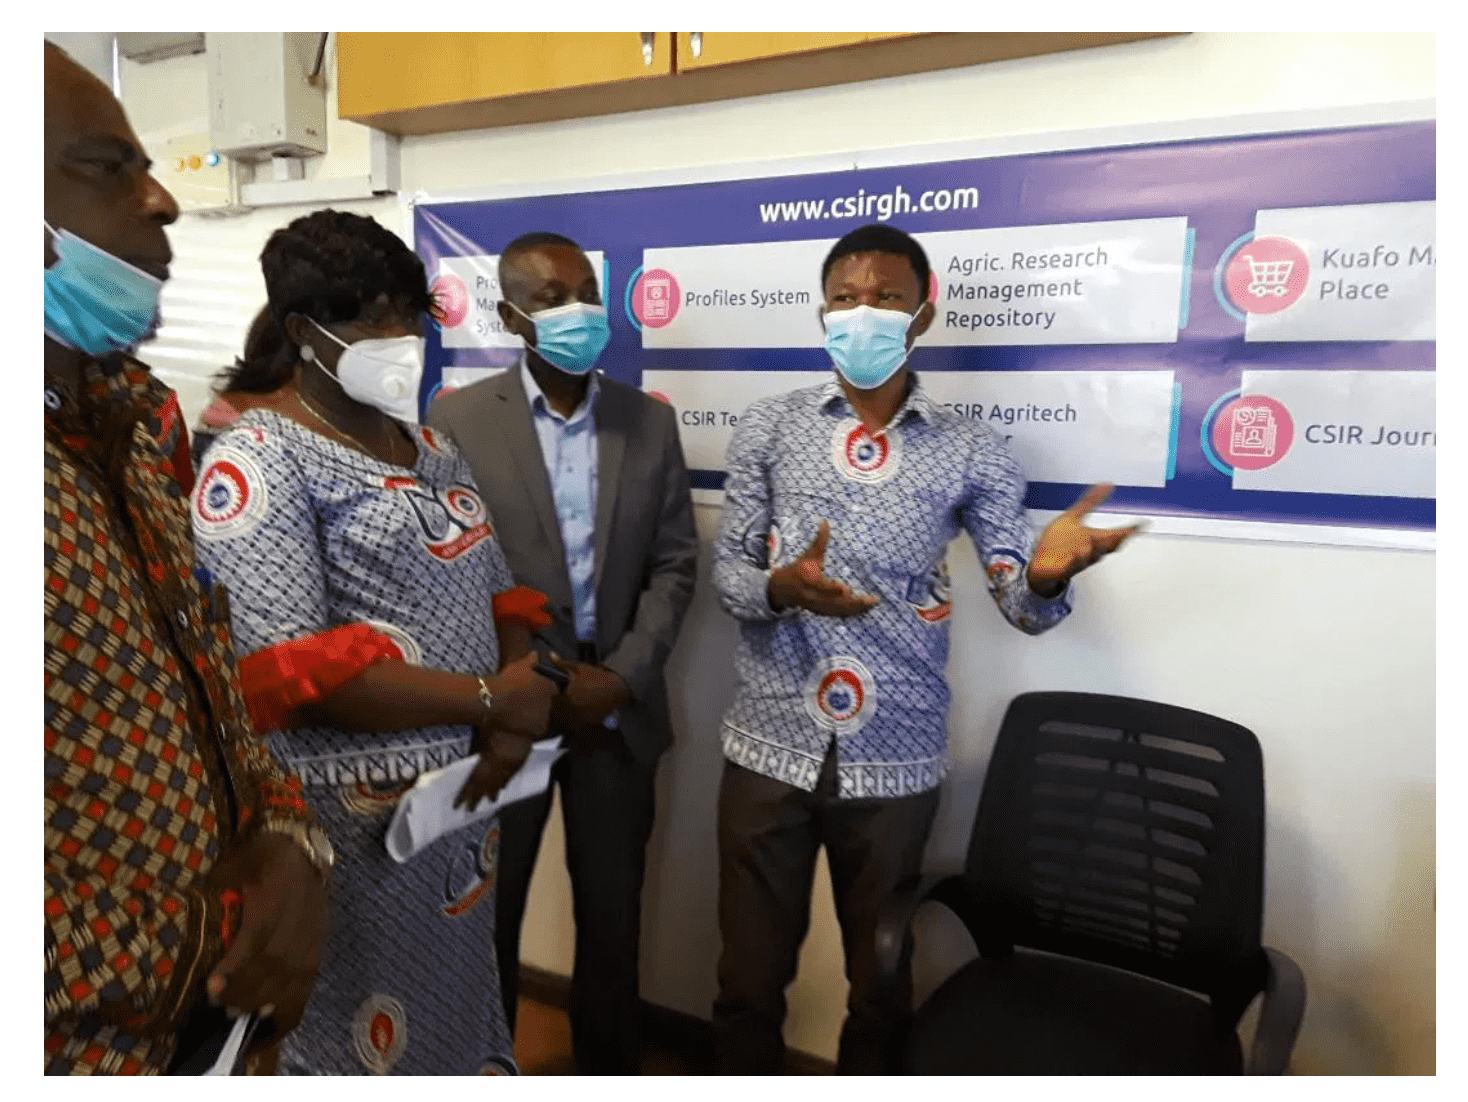 CSIR-INSTI Makerspace launched in Accra